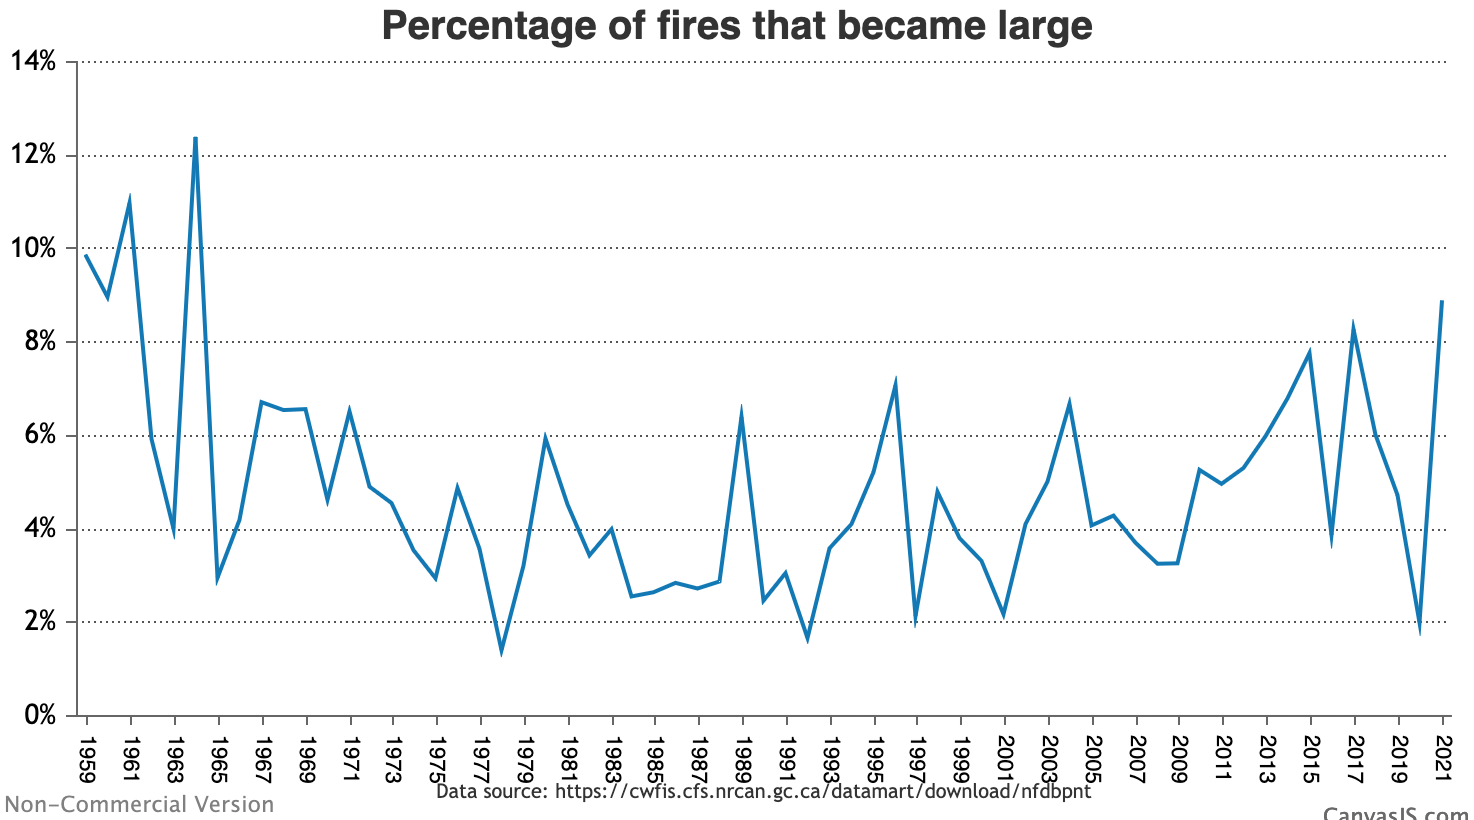 Percentage of Wildefires that became large. Source: Fraser Institute, Canada.